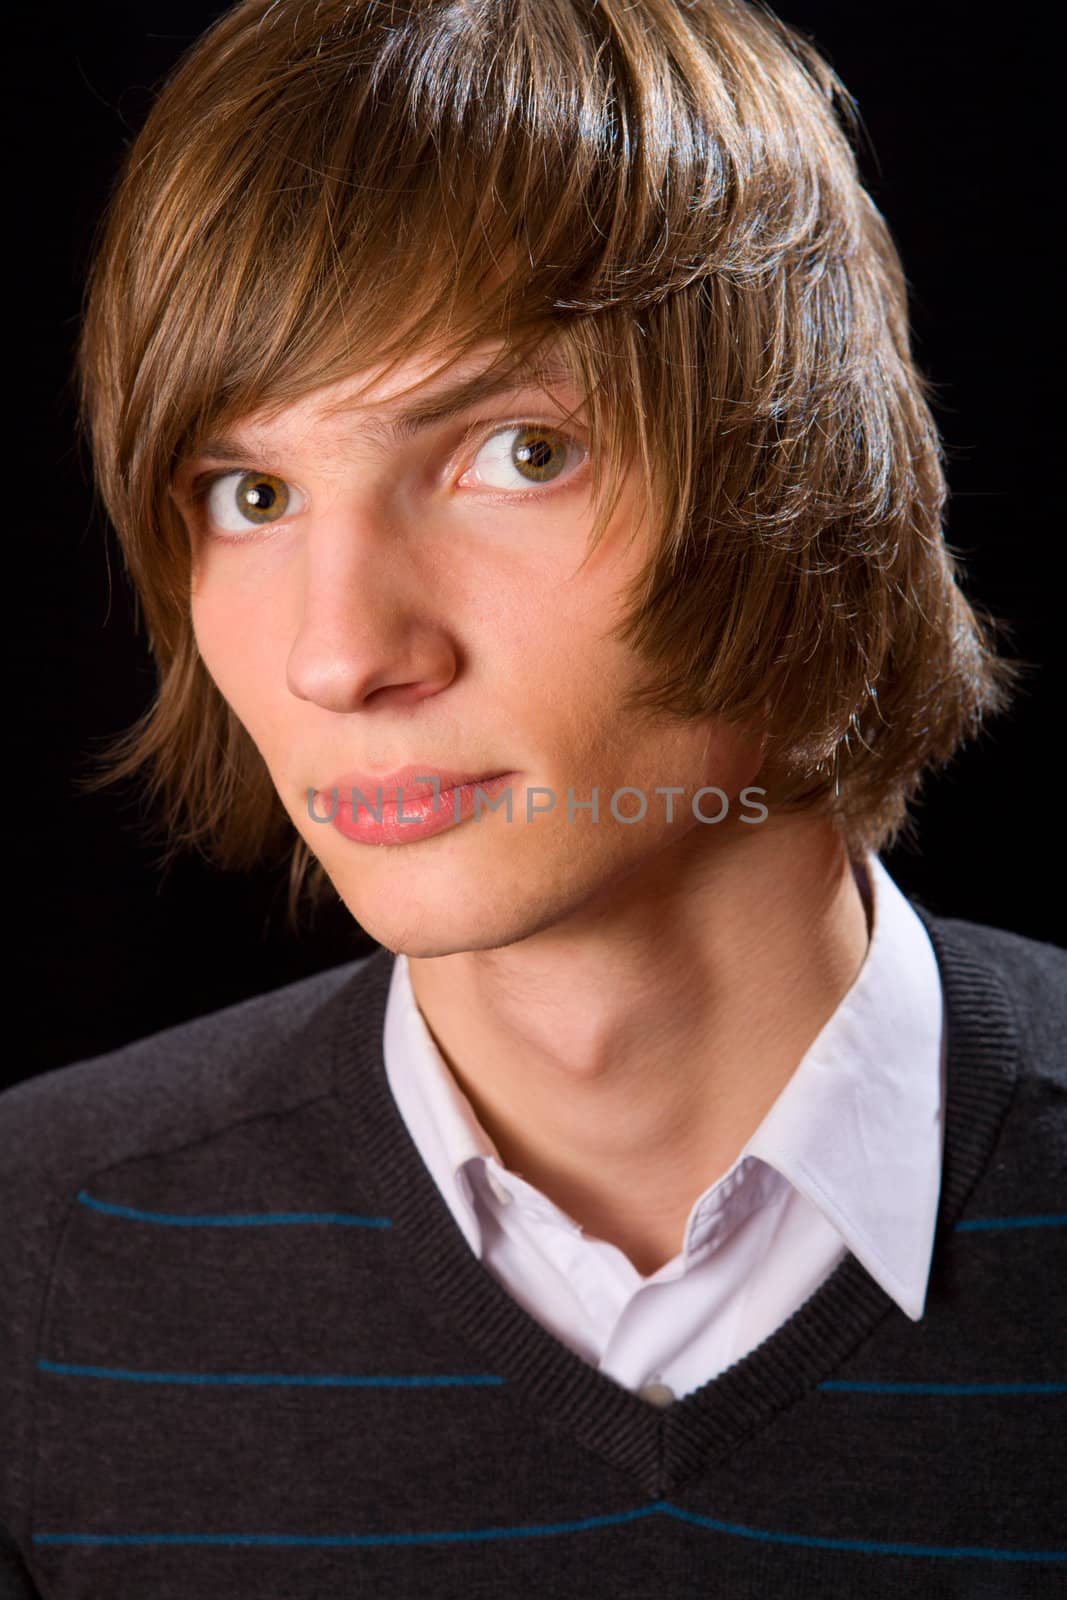 Young serious man over black background